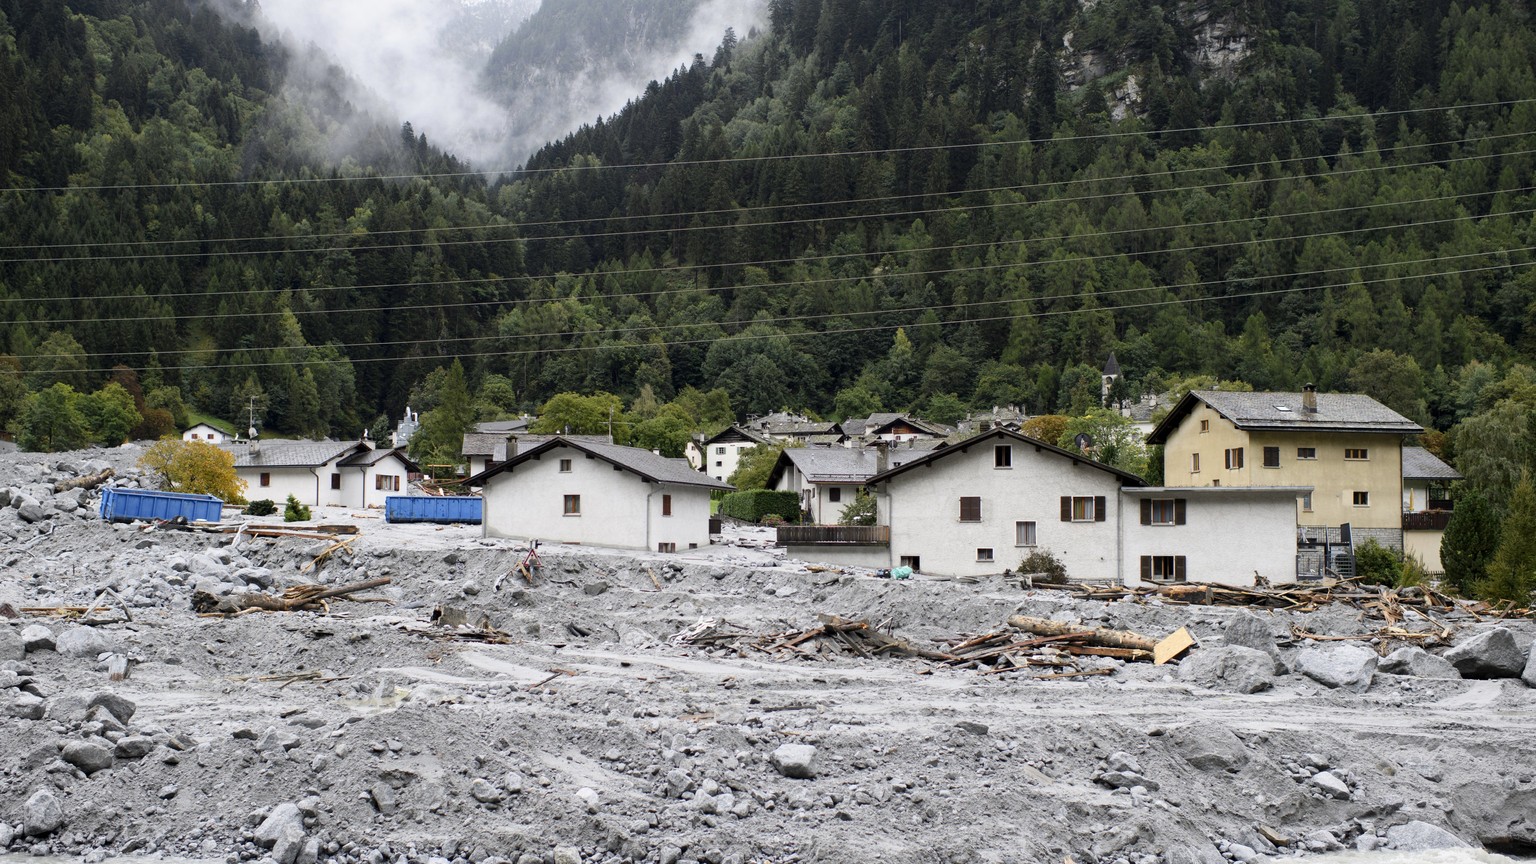 epa06195770 A general view over debris during a media tour in the evacuated village of Bondo, Switzerland, 10 September 2017. The village has been hit by a massive landslide on 23 August, eight people ...